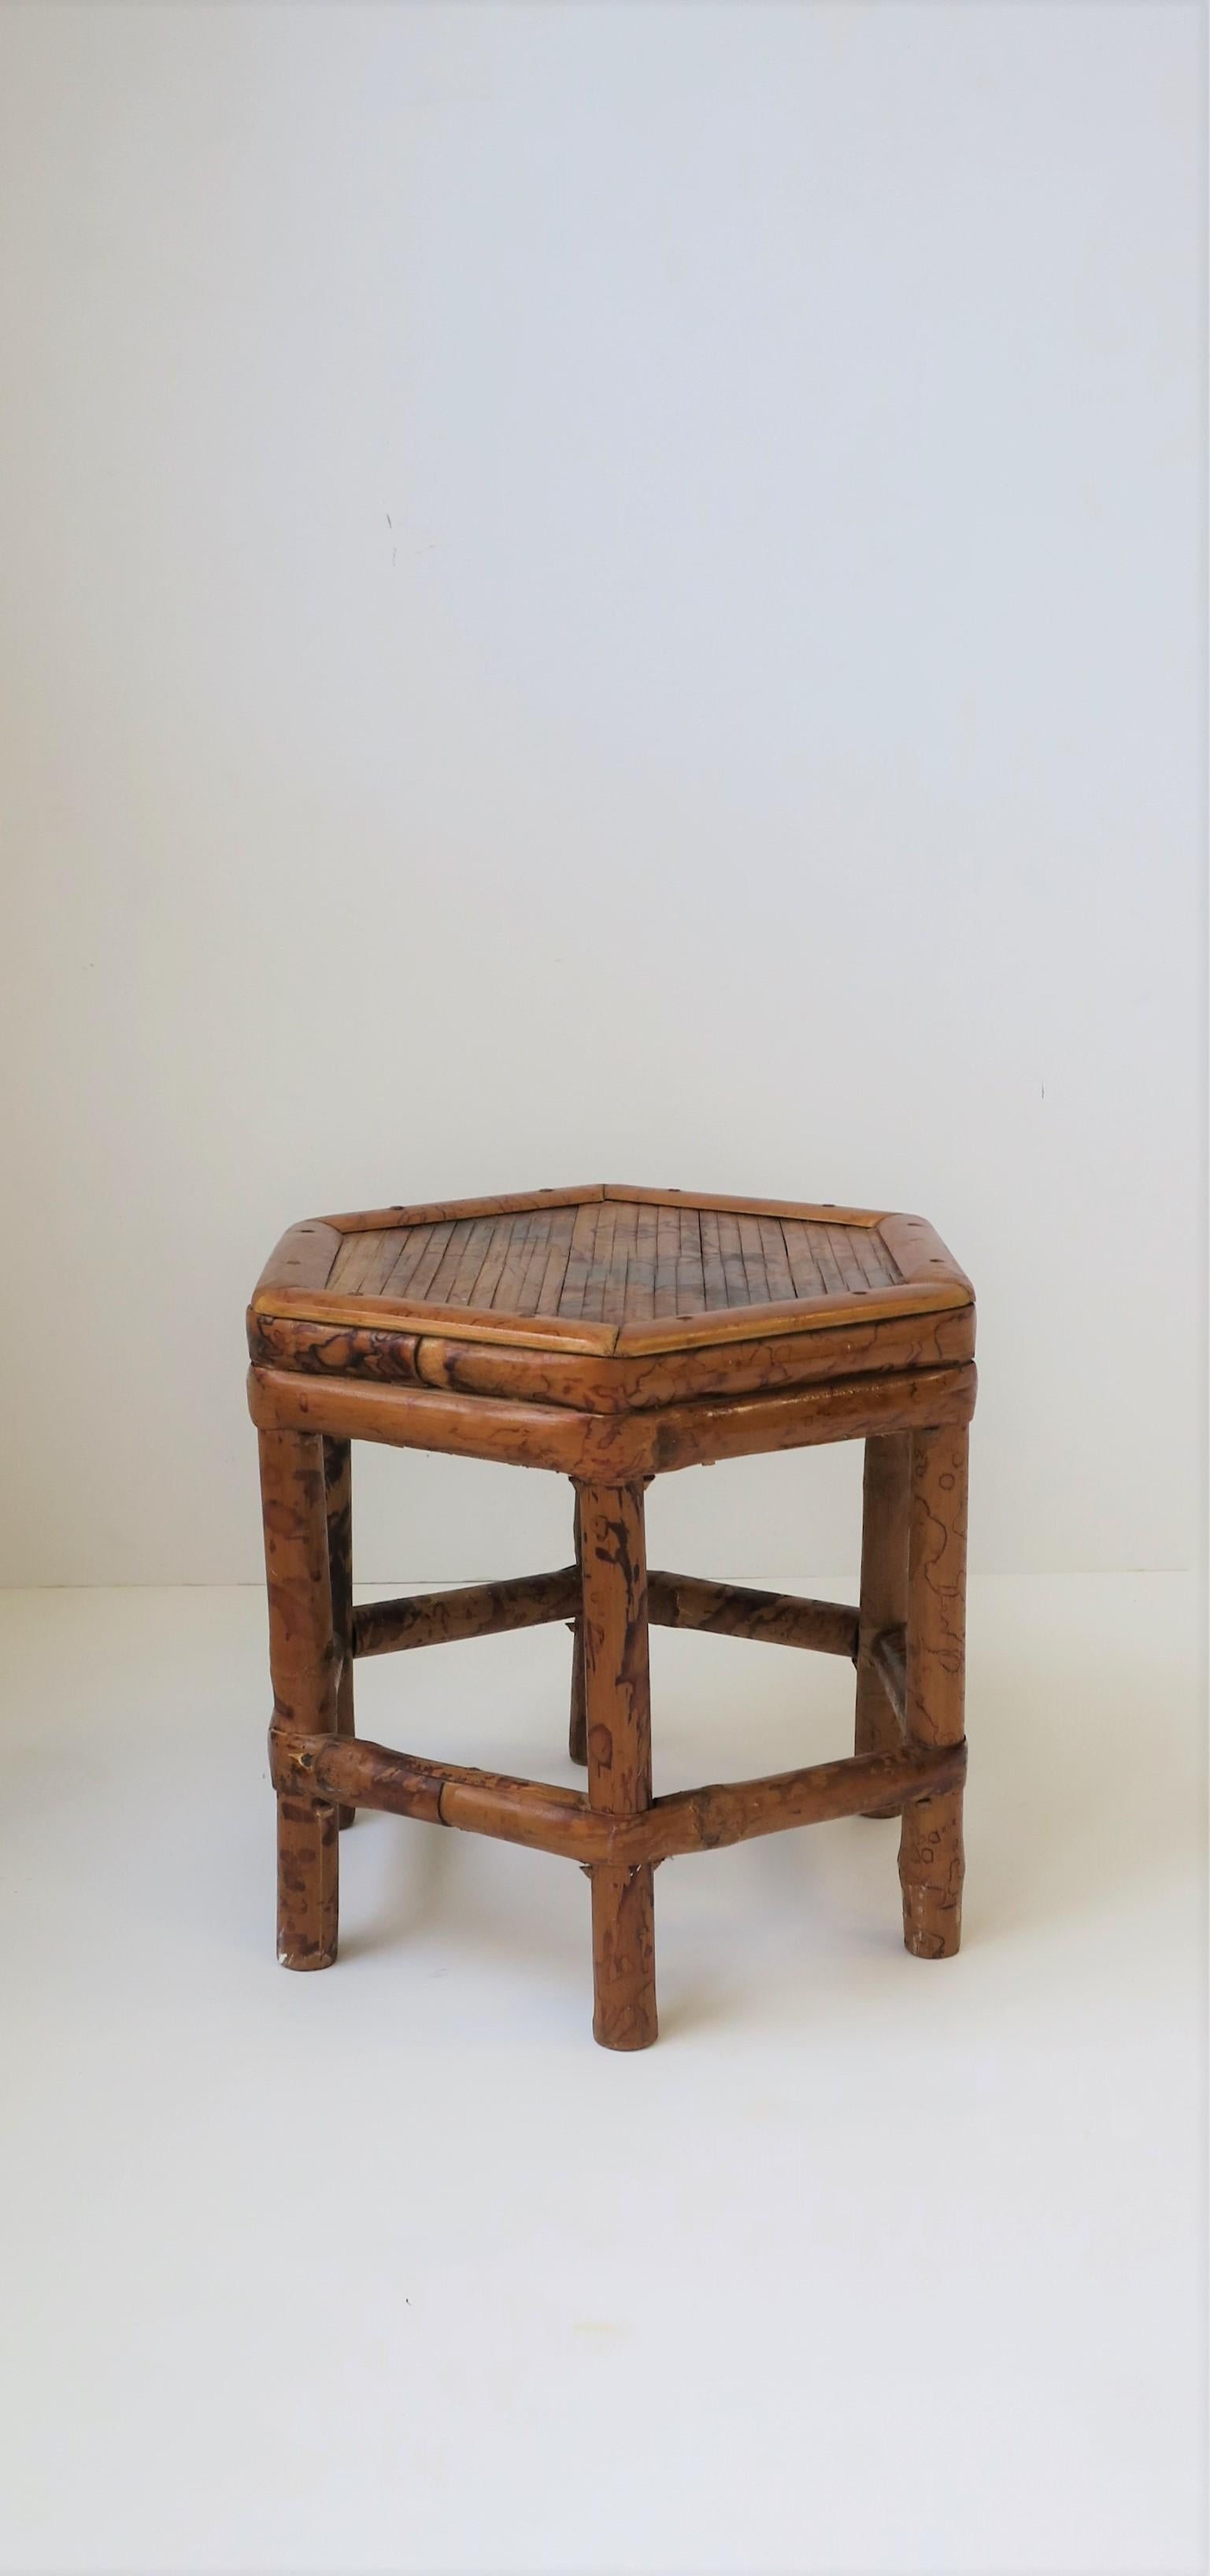 Small Bamboo Pedestal Side Table or Plant Stand 5